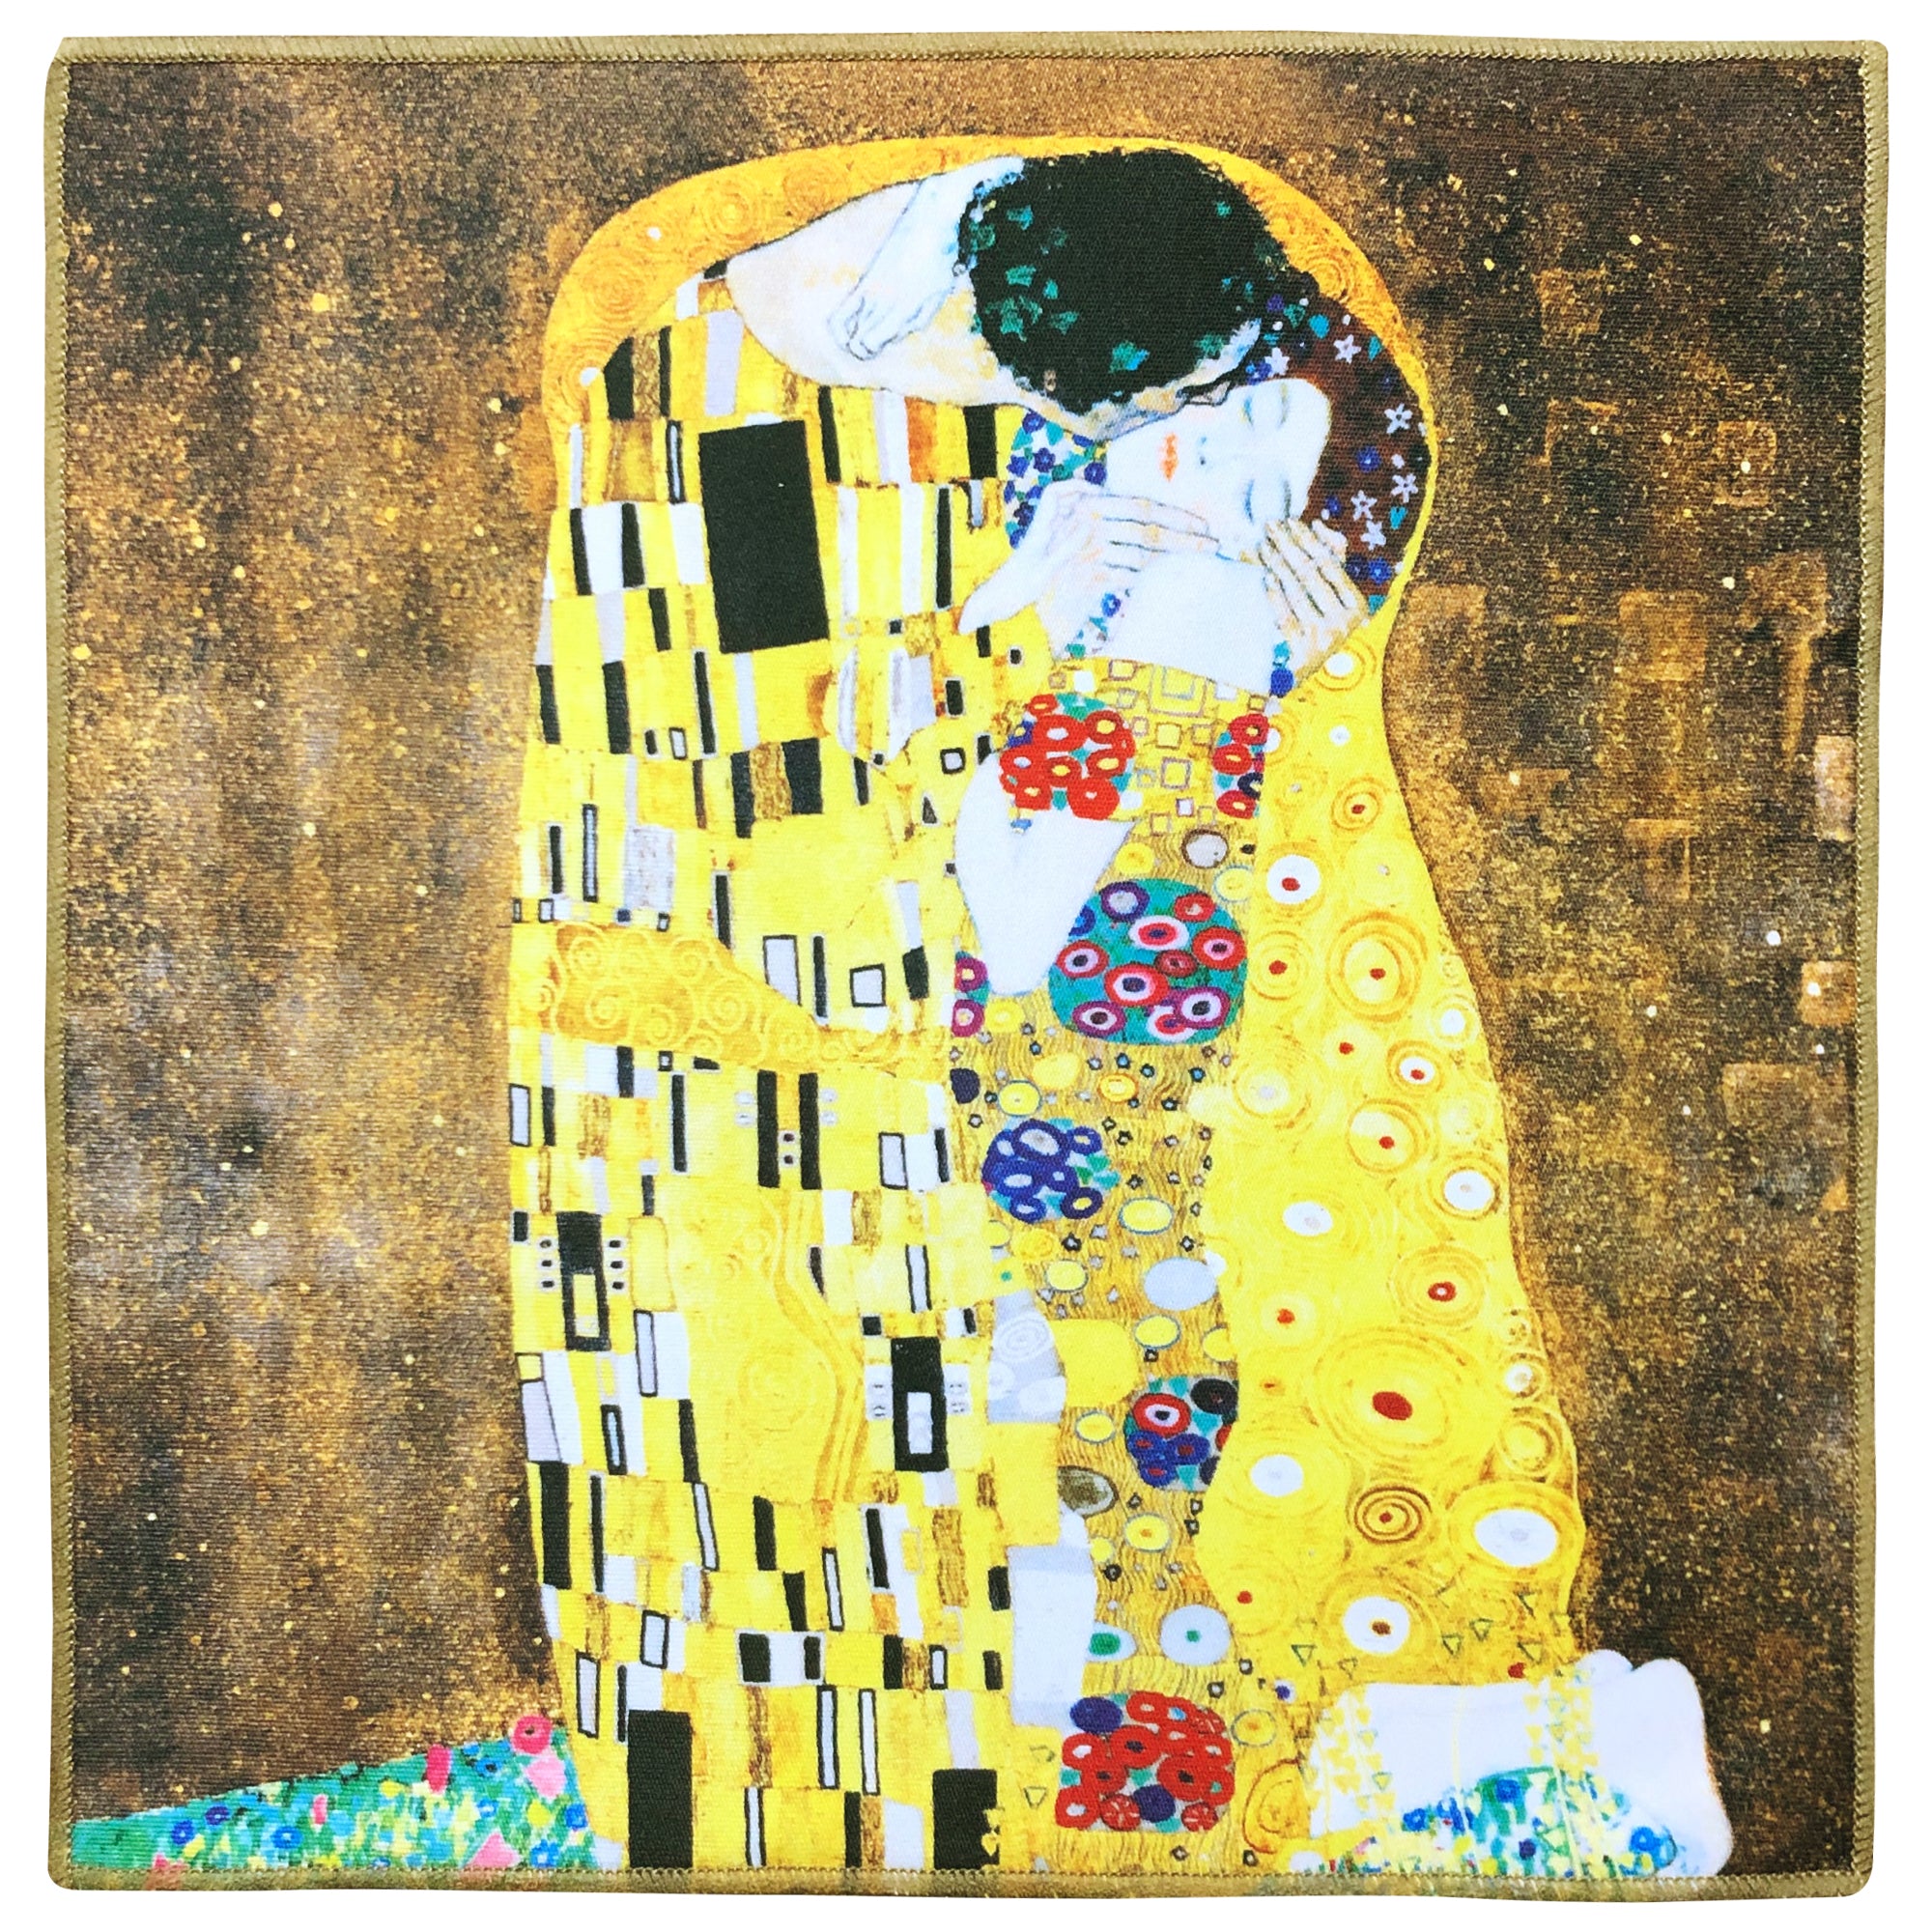 [6 Pack] Gustav Klimt "The Kiss" - Art Collection - Ultra Premium Quality Microfiber Cleaning Cloths